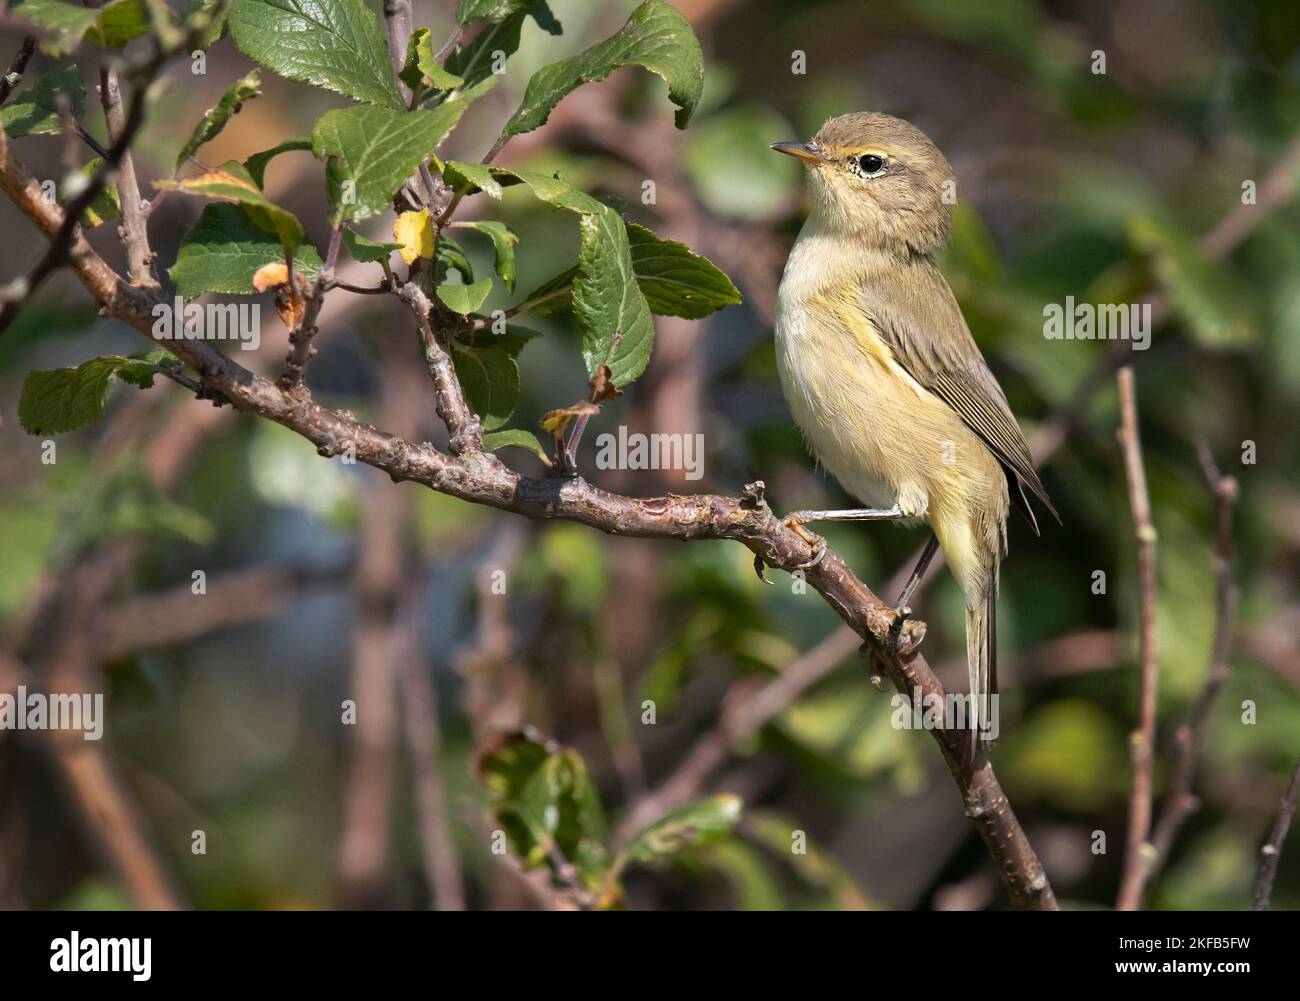 Chiffchaff taken at Connahs Quay nature reserve on the Dee Estuary, North Wales, Great Britain, UK Stock Photo